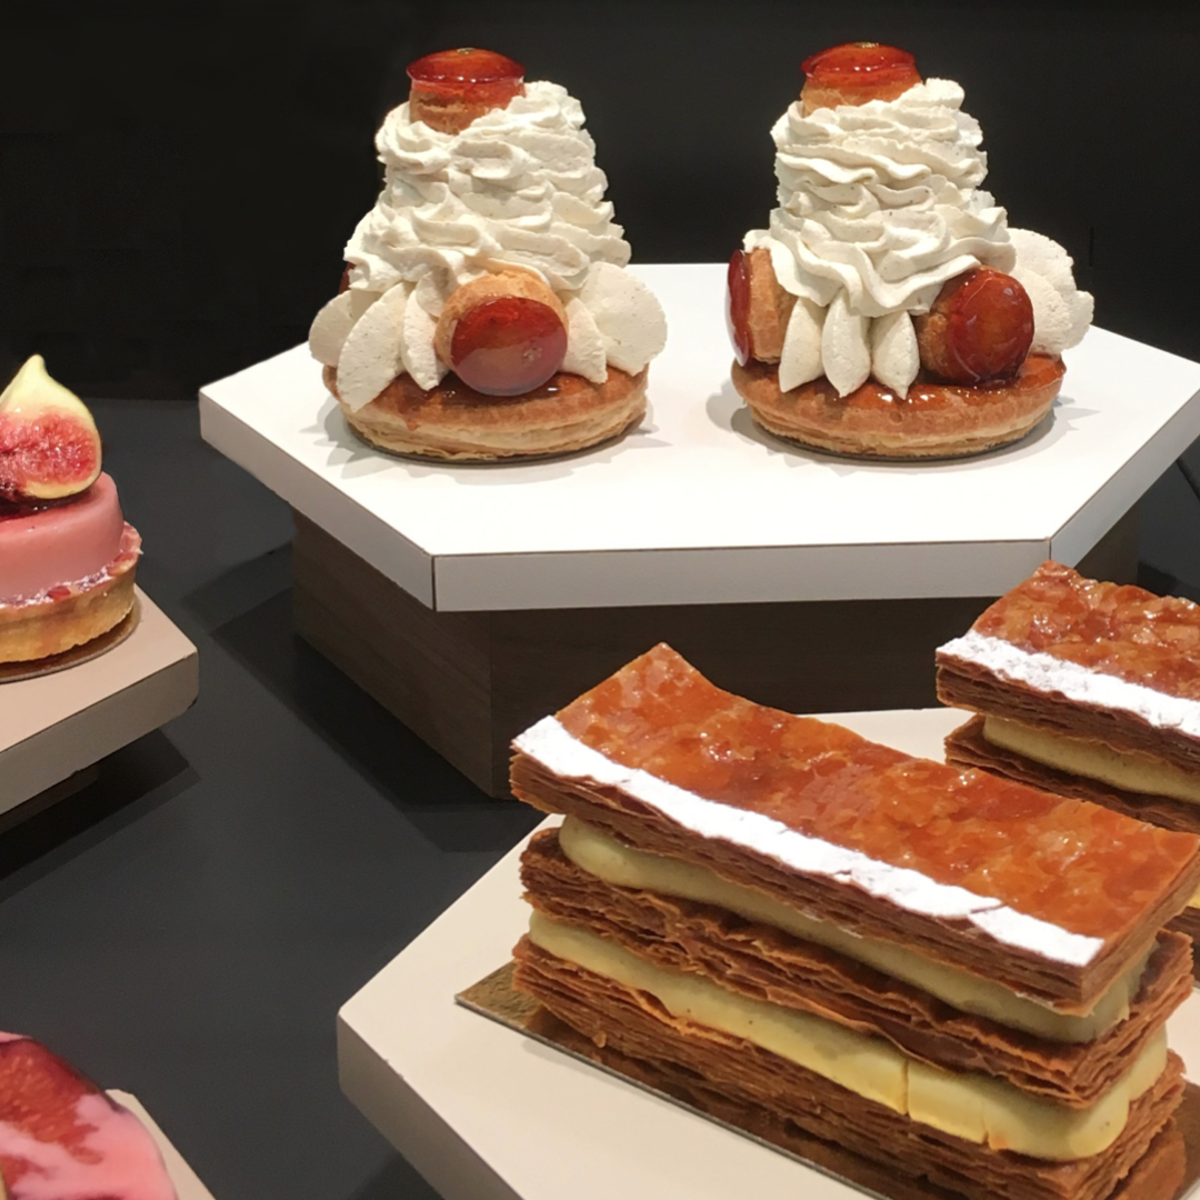 19th century Paris pastry and literature walk and tasting